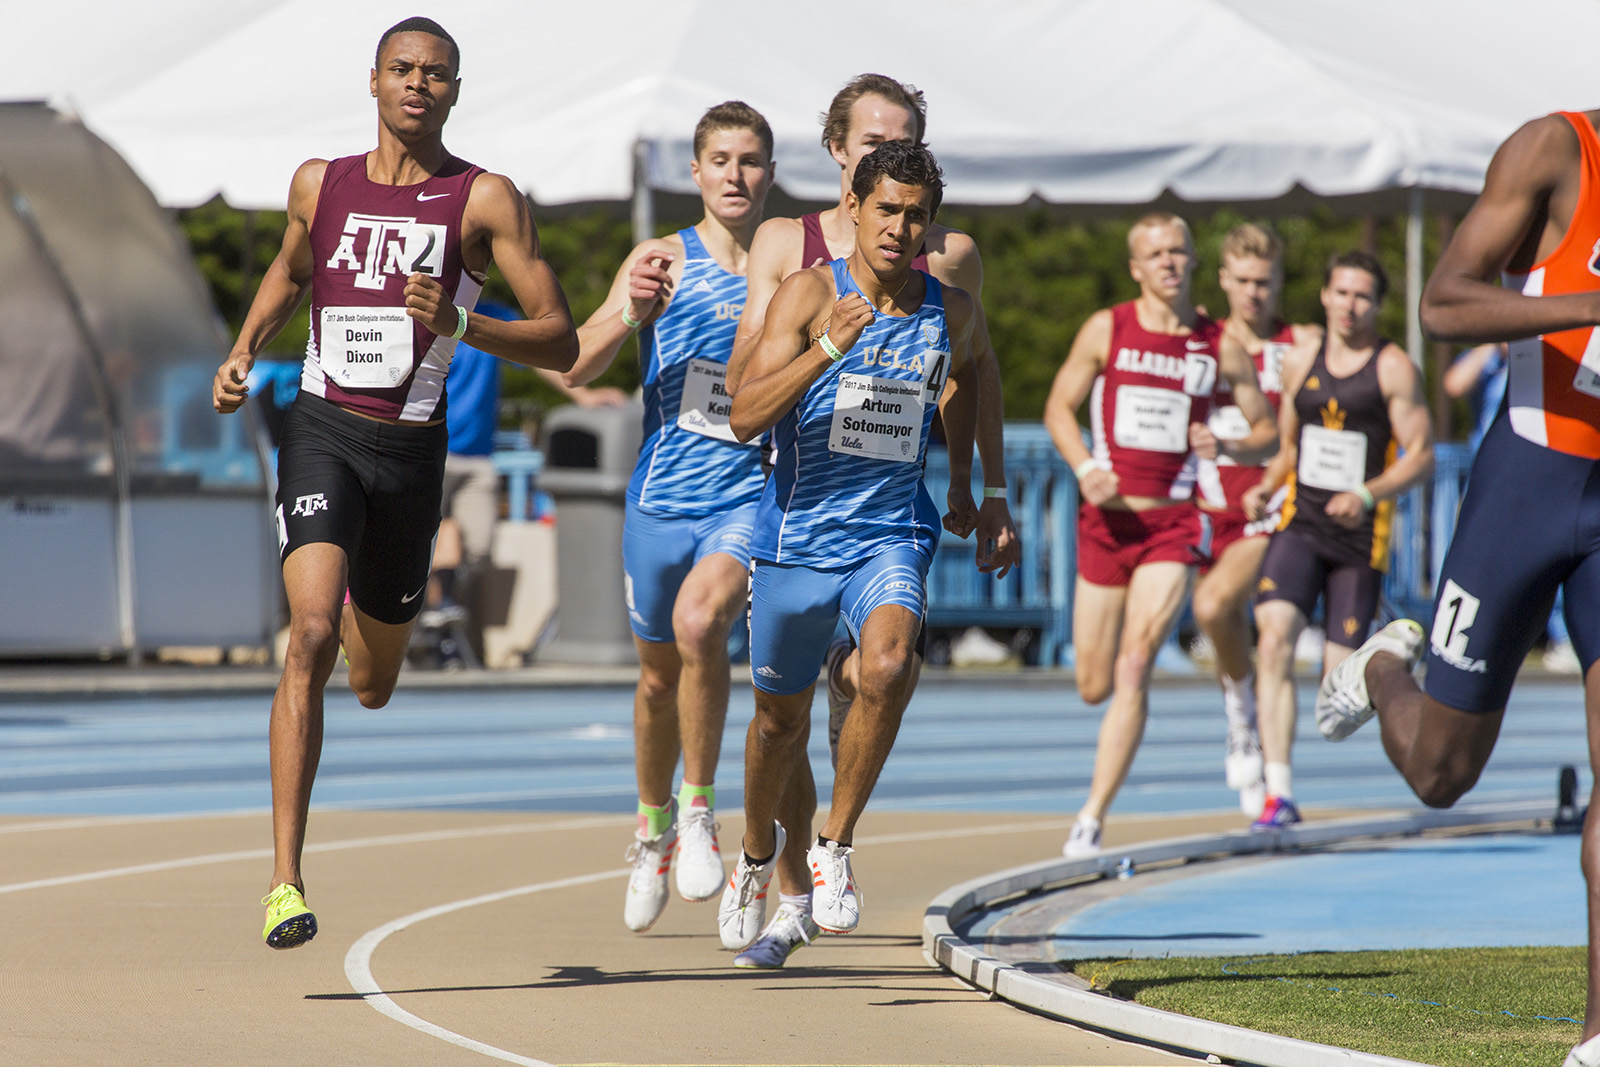 UCLA track and field team shows leaps in improvement over seasons